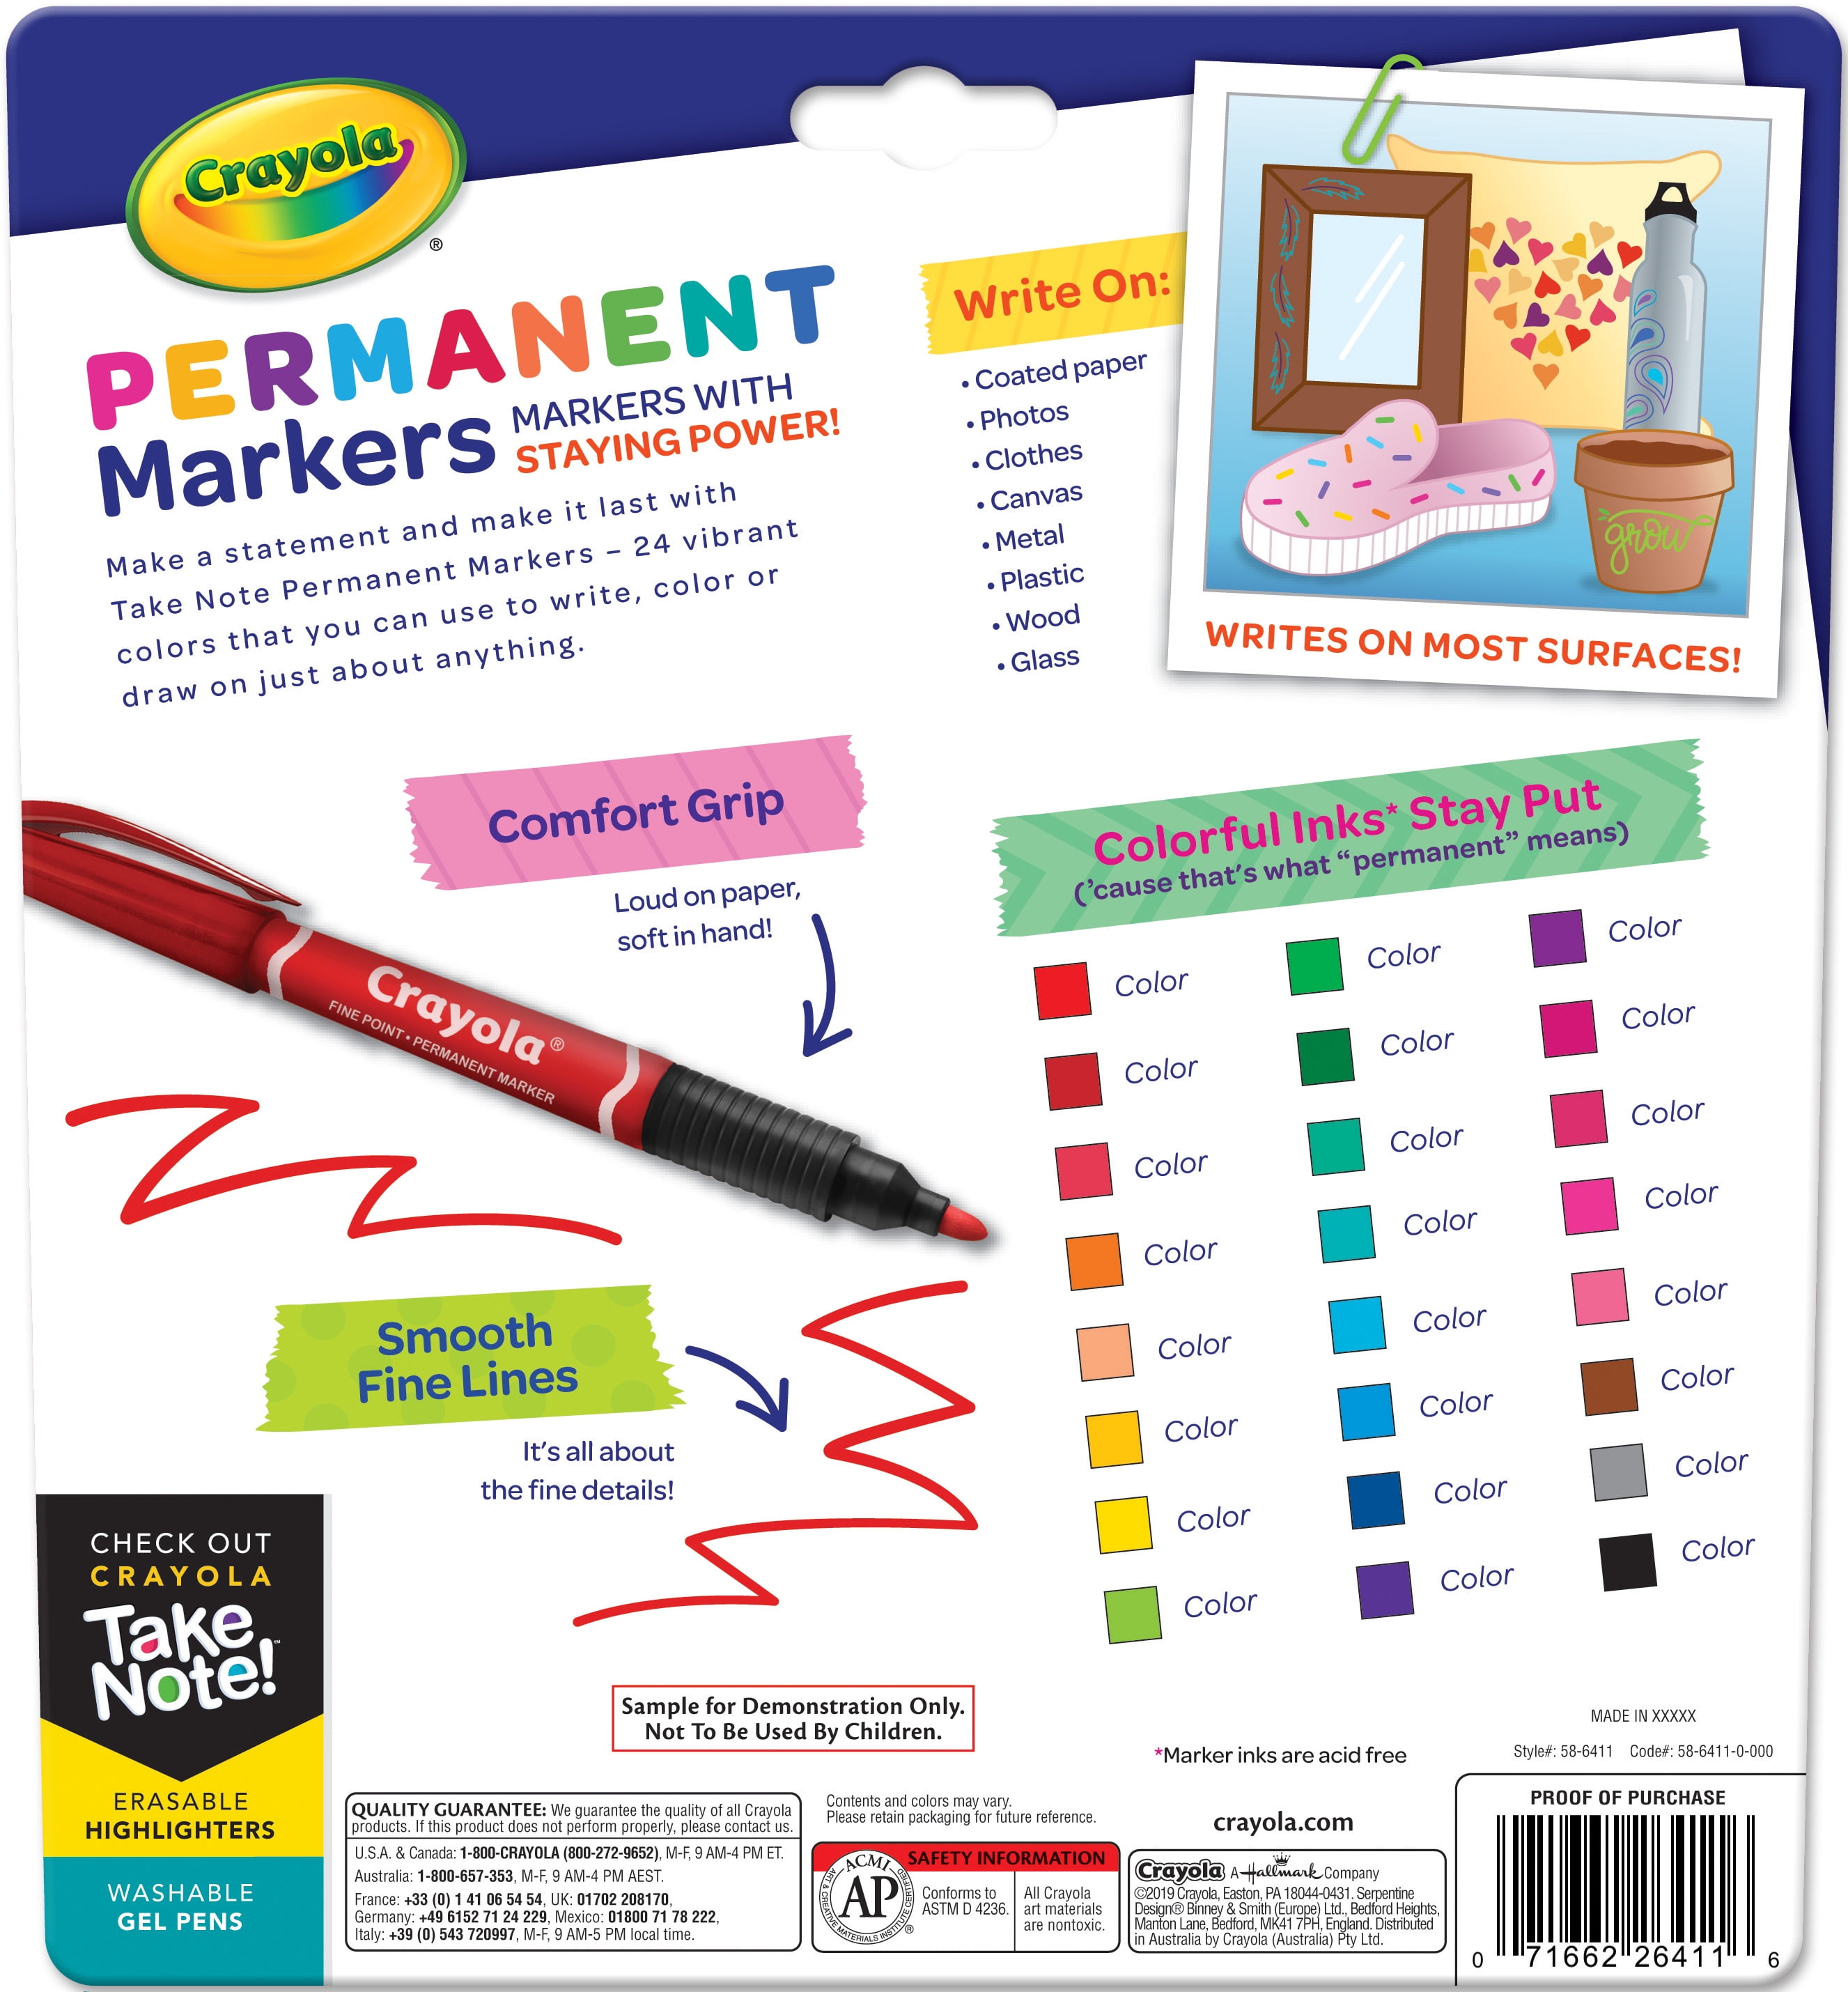 Crayola Take Note Fine Point Permanent Markers, 12 pk - Harris Teeter